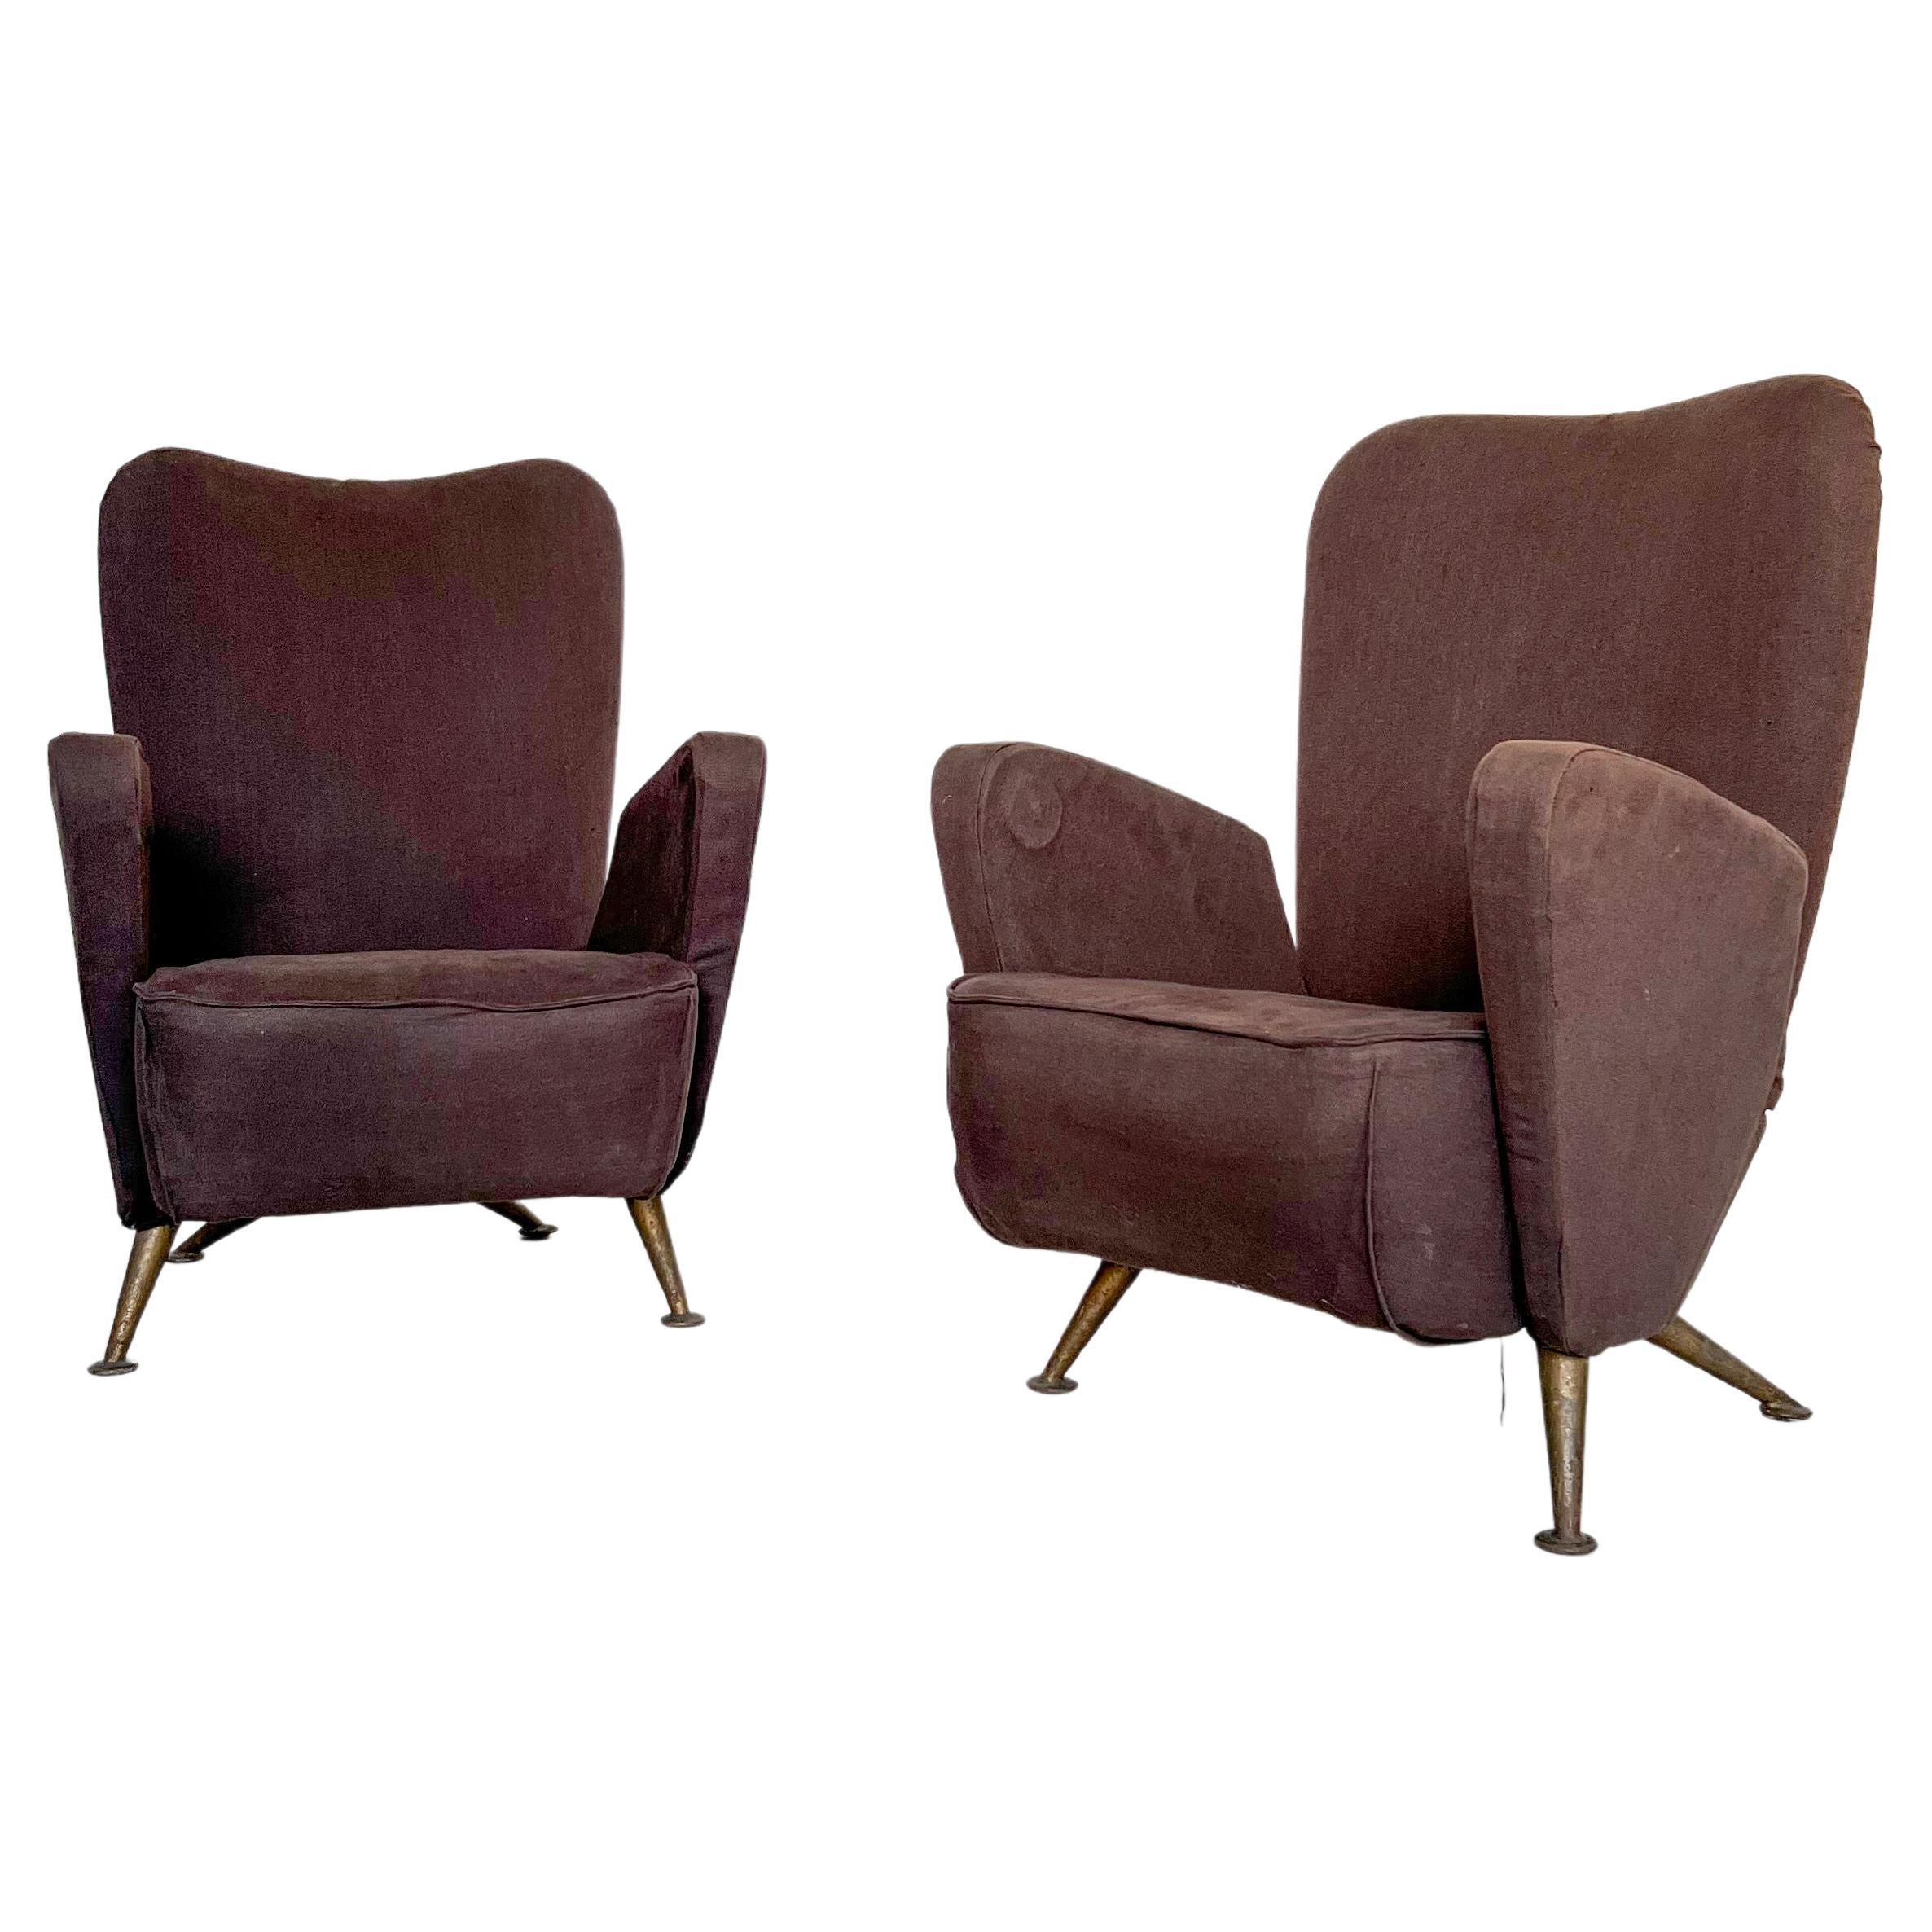 Set of Two Armchairs by Gio Ponti and Giulio Minoletti for the Settebello Train For Sale